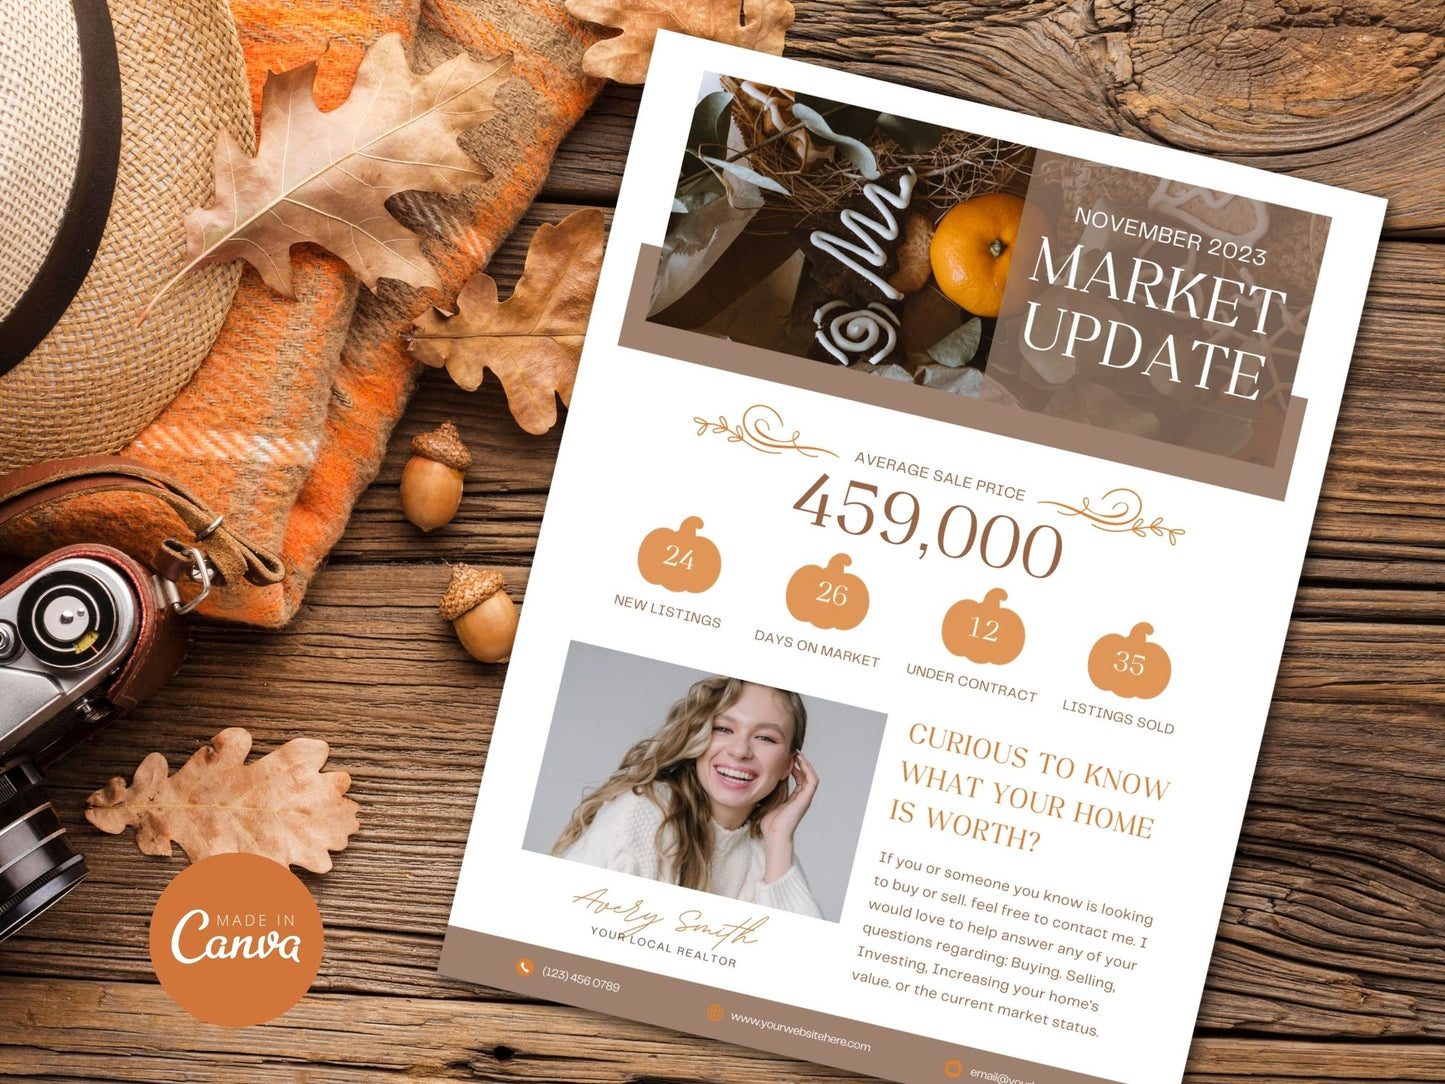 Real Estate Fall Market Update Flyer Vol 02 - Eye-catching flyer delivering essential fall market insights in a visually appealing format for effective communication with clients and prospects.